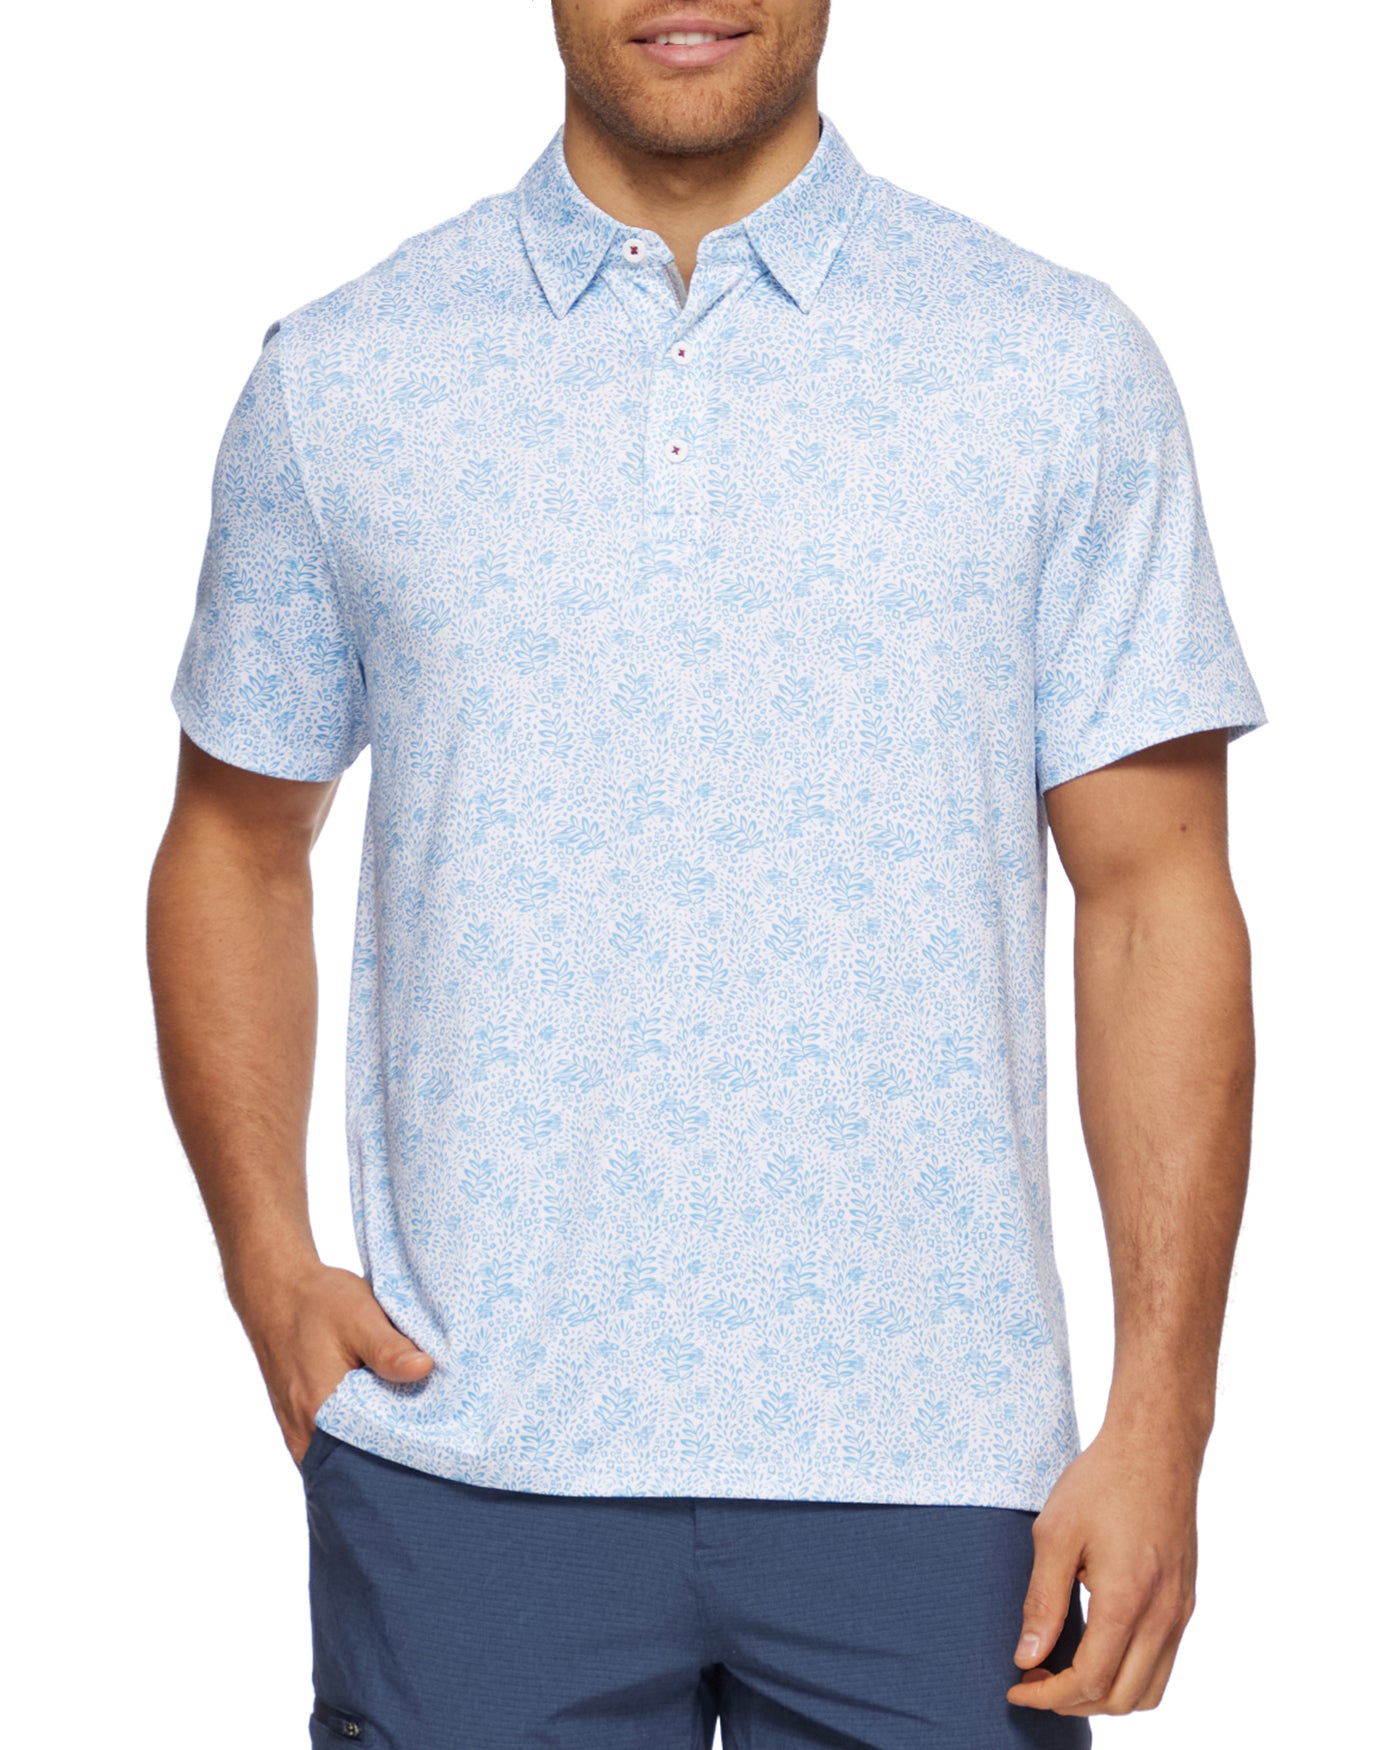 MVP WILLOUGHBY LEAF PRINT POLO